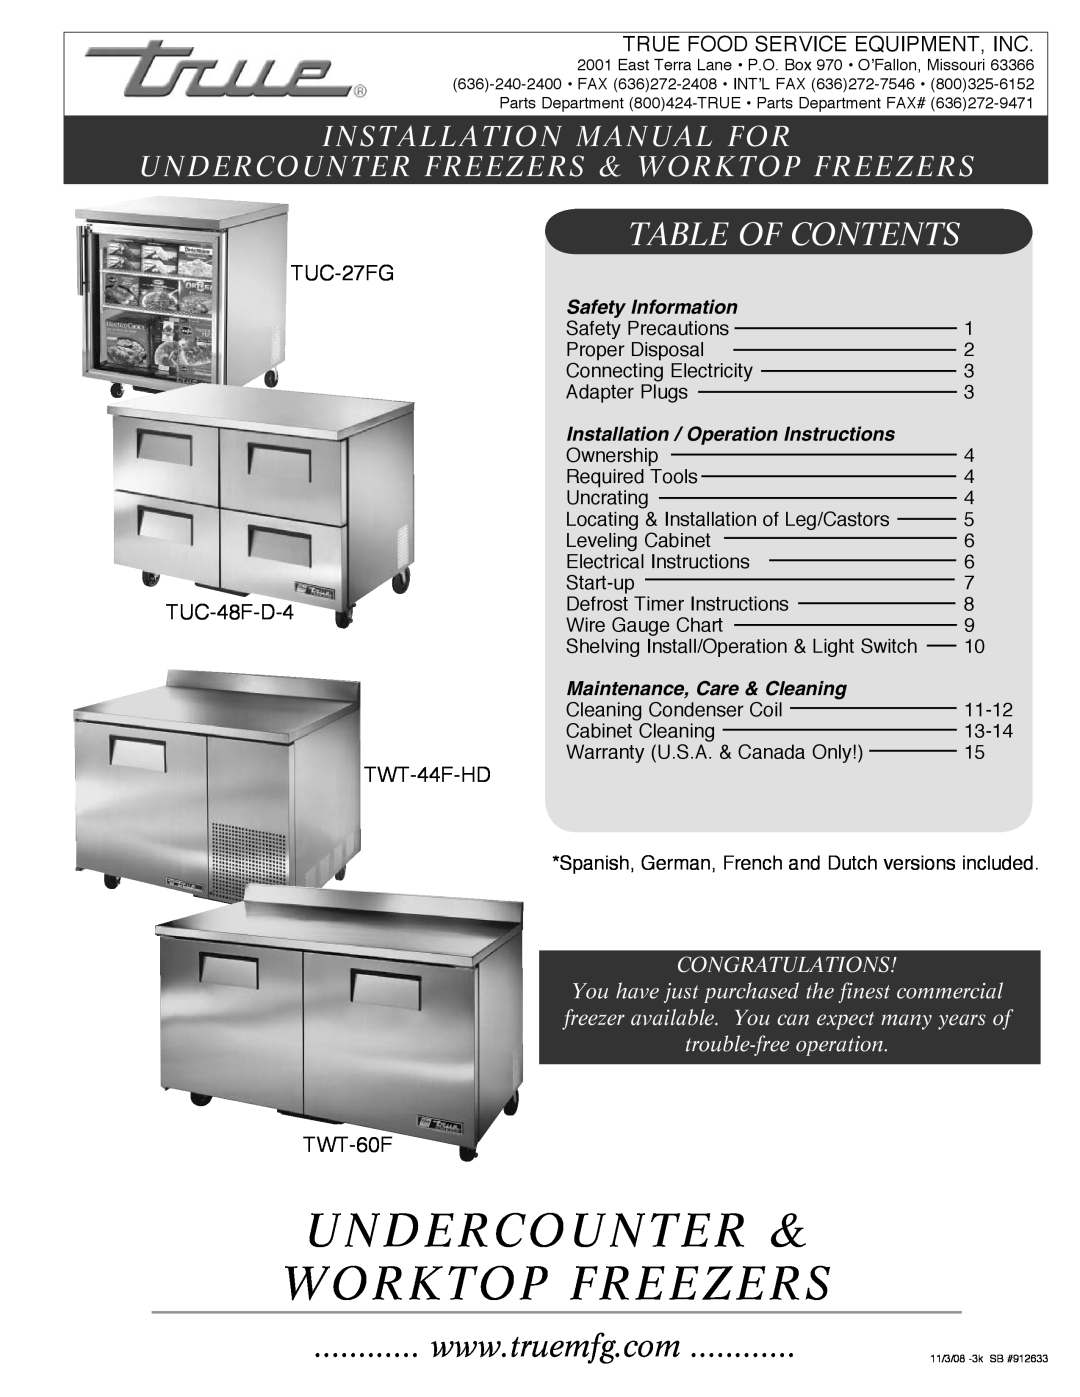 True Manufacturing Company TUC-48F-D-4 installation manual Undercounter & Worktop Freezers, Table Of Contents, TUC-27FG 